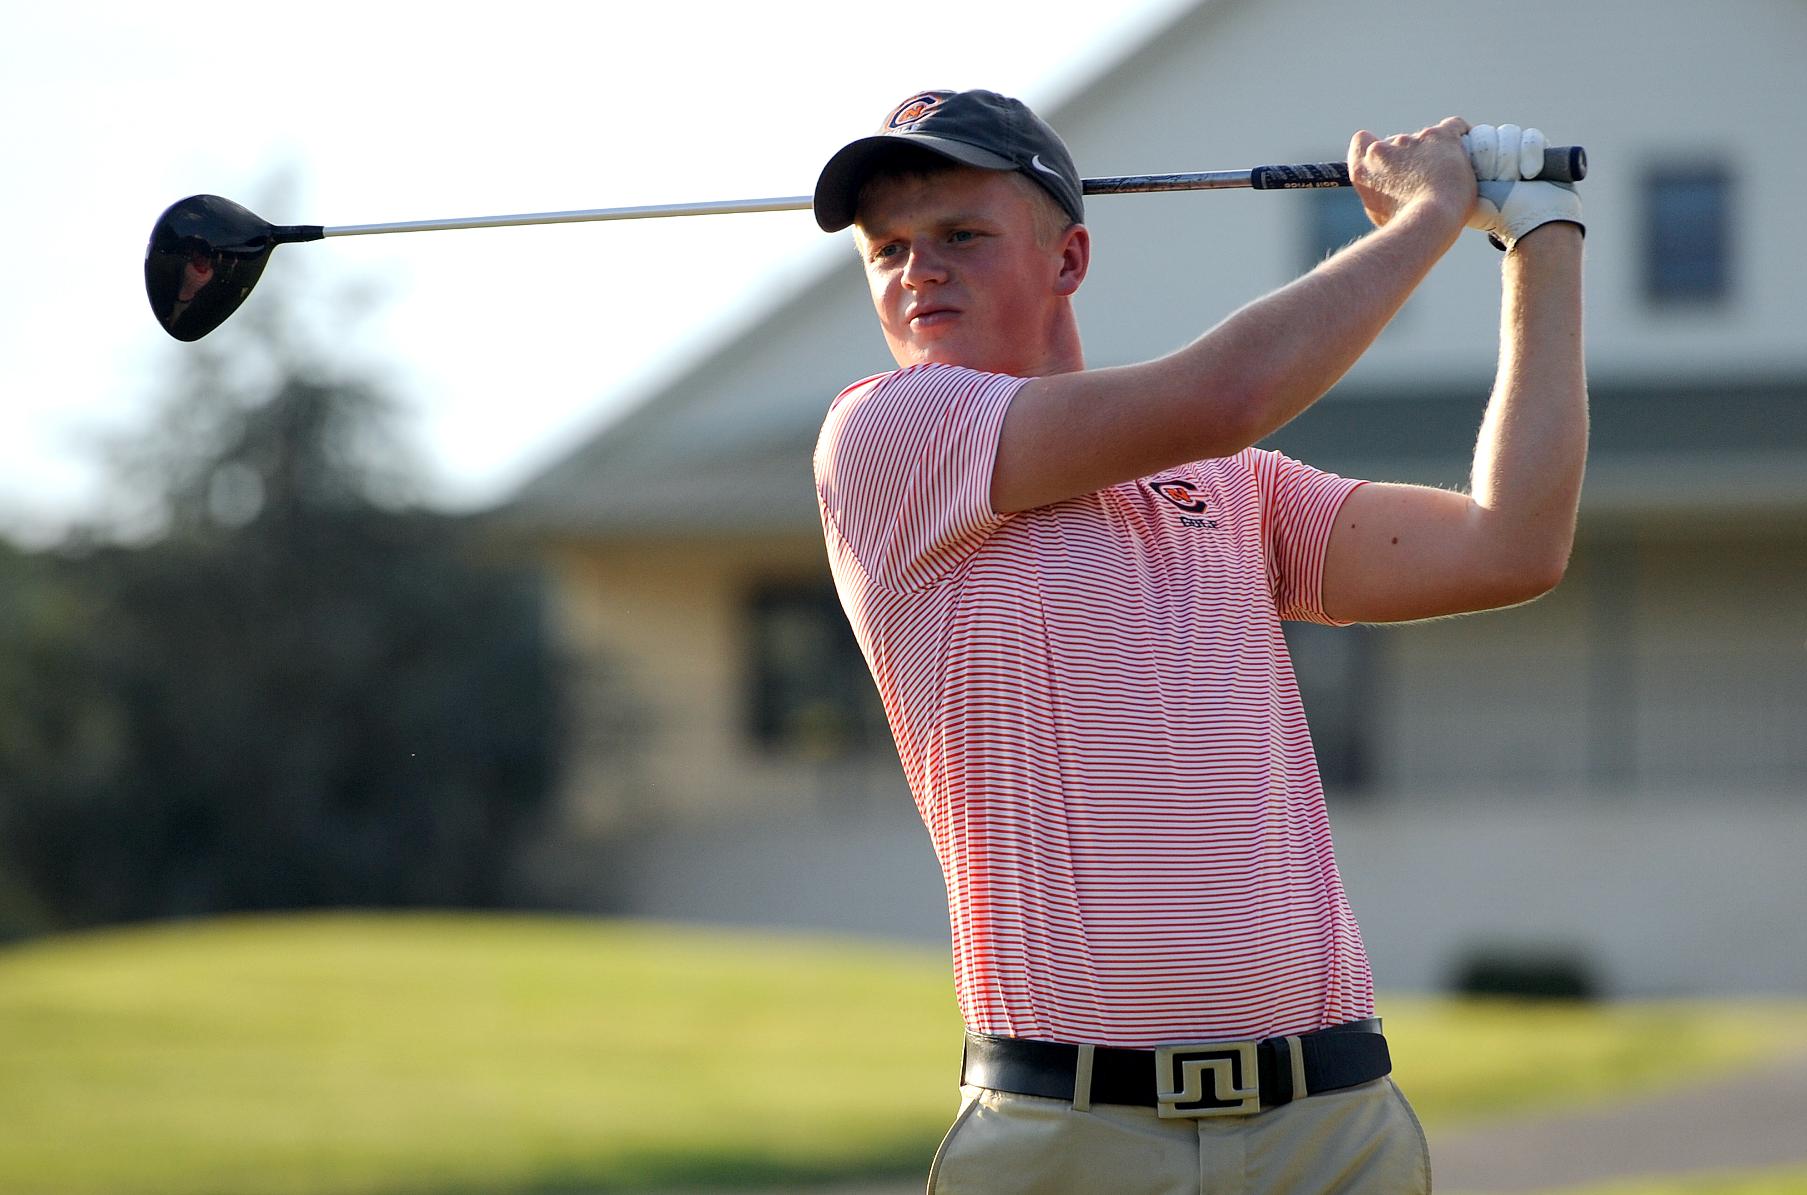 Forster Leading the Way as Men's Golf Places 12th After Day One in Orlando